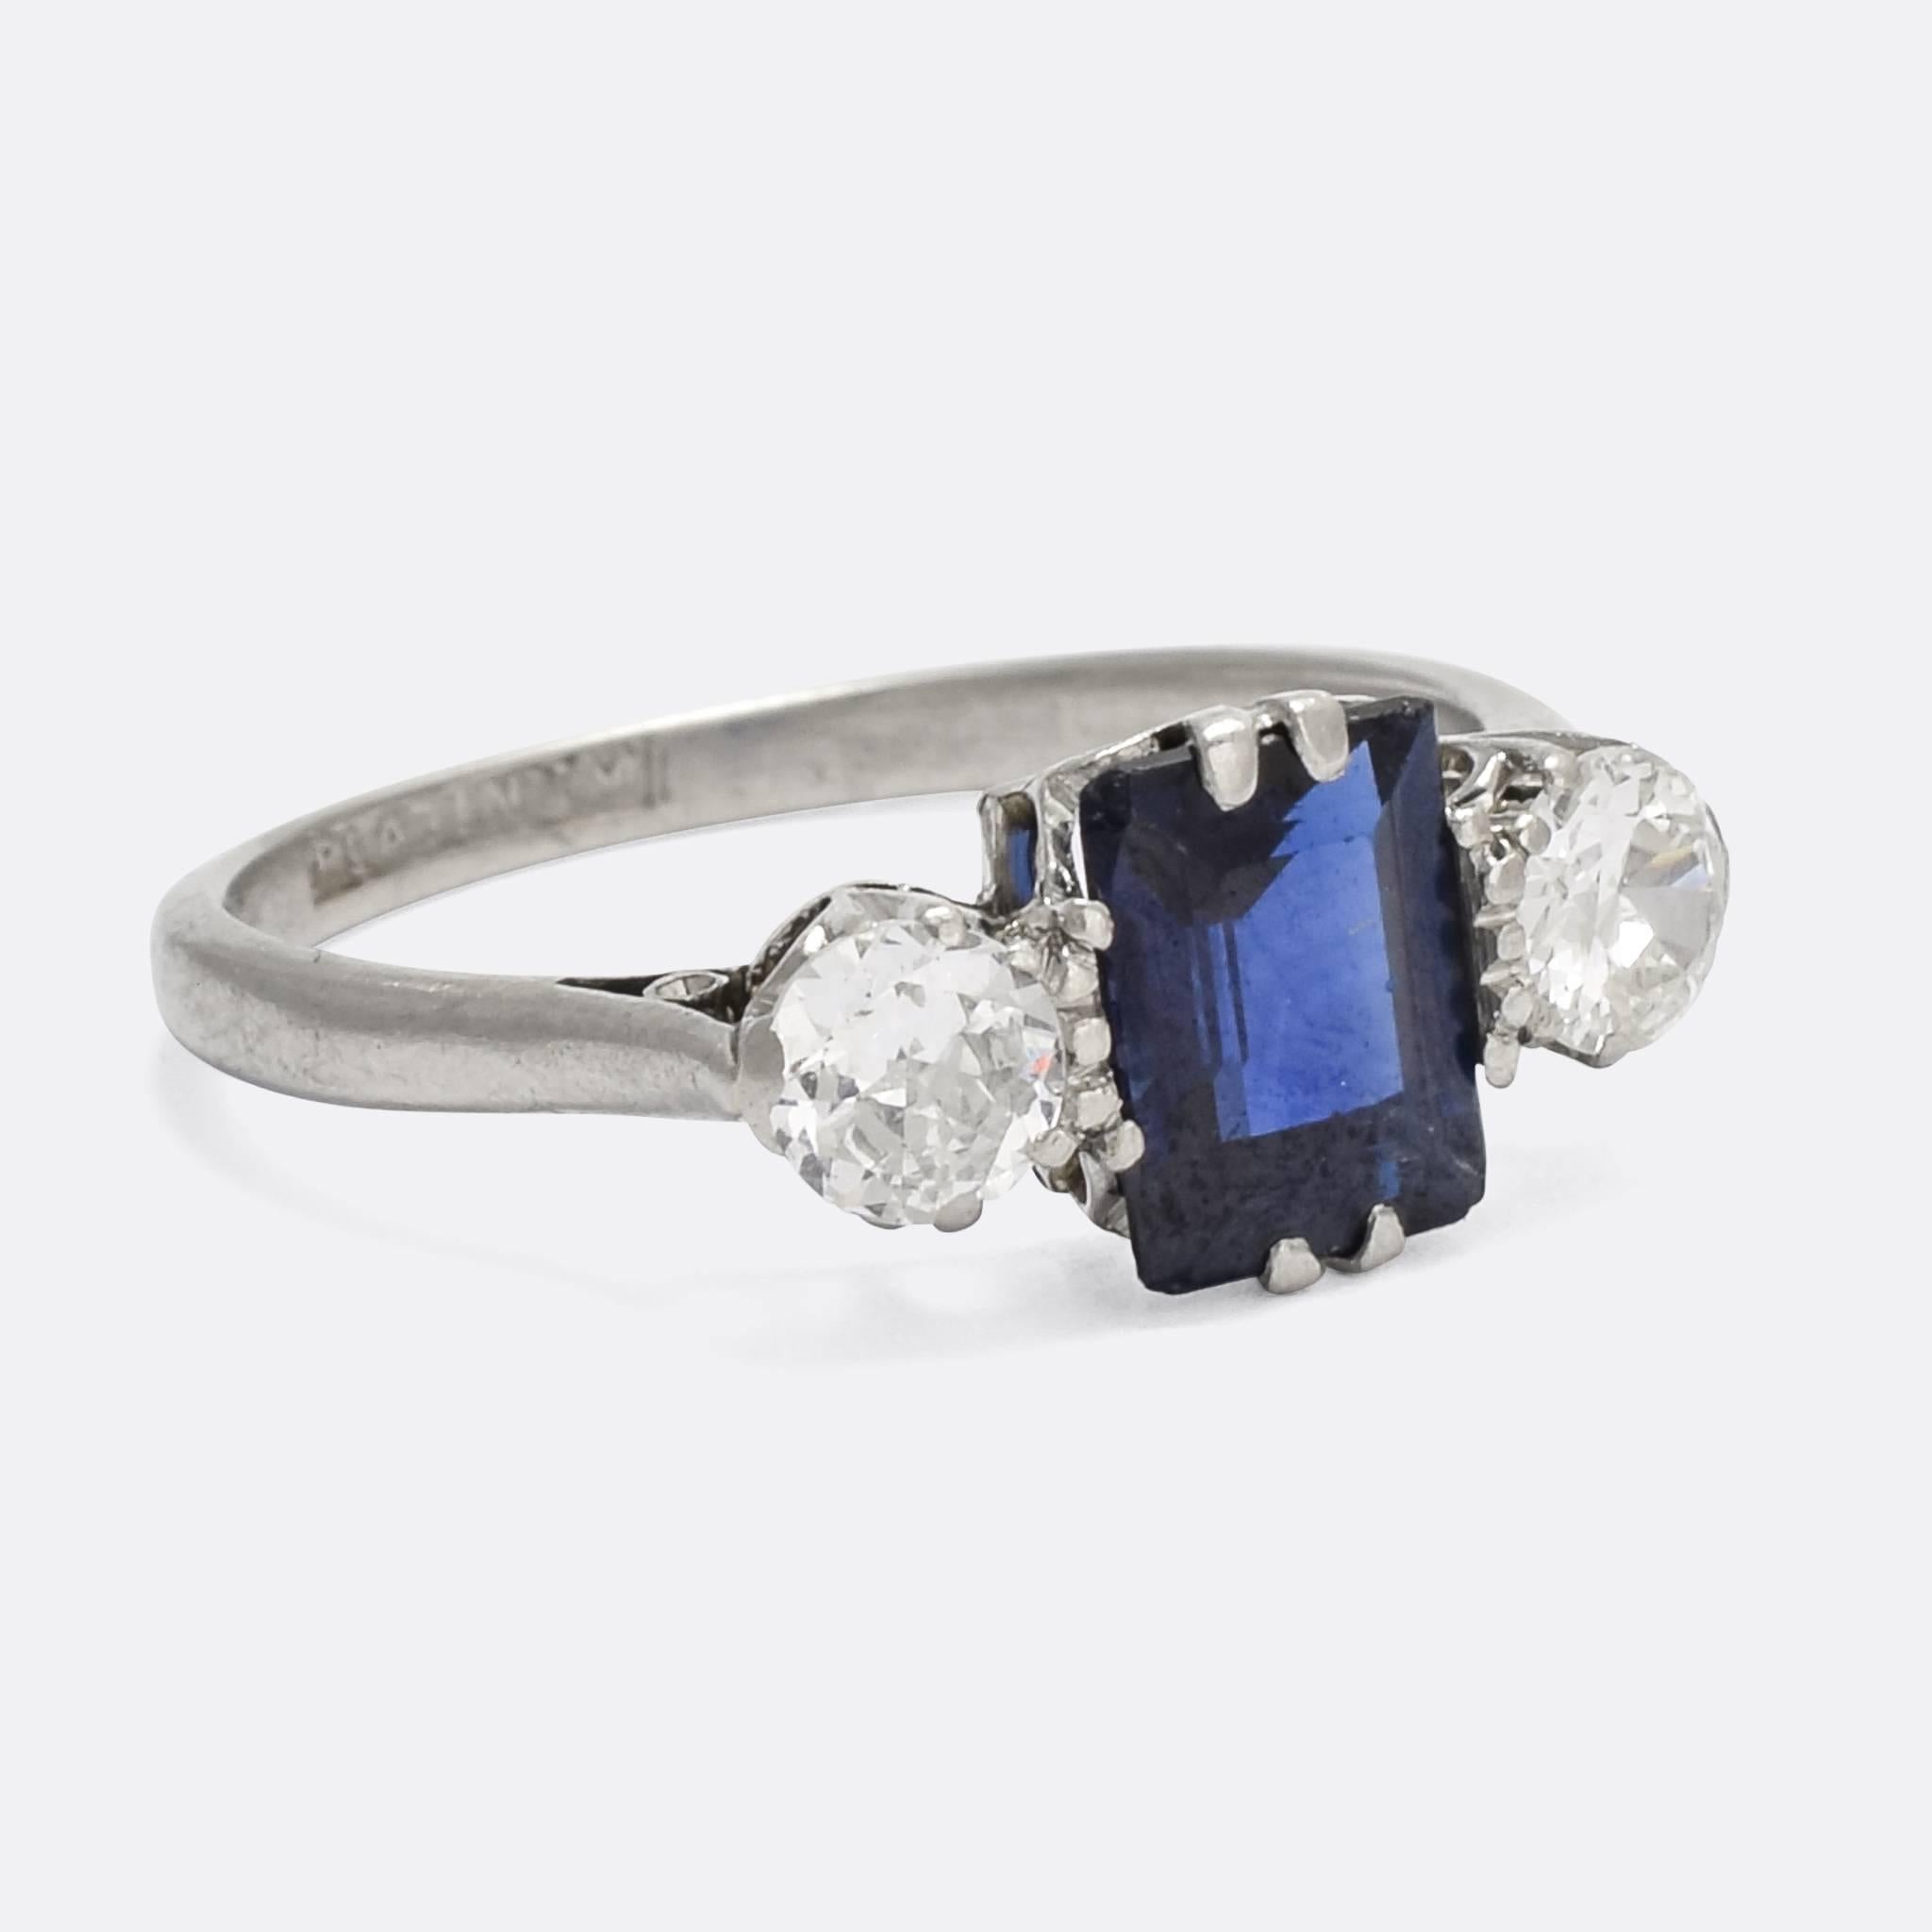 A superb antique sapphire and diamond trilogy ring. The main stone is a vibrant, emerald cut blue sapphire, flanked by two bright transitional cut diamonds. It's modelled in platinum throughout, and dates from circa 1910.

The three stones of a